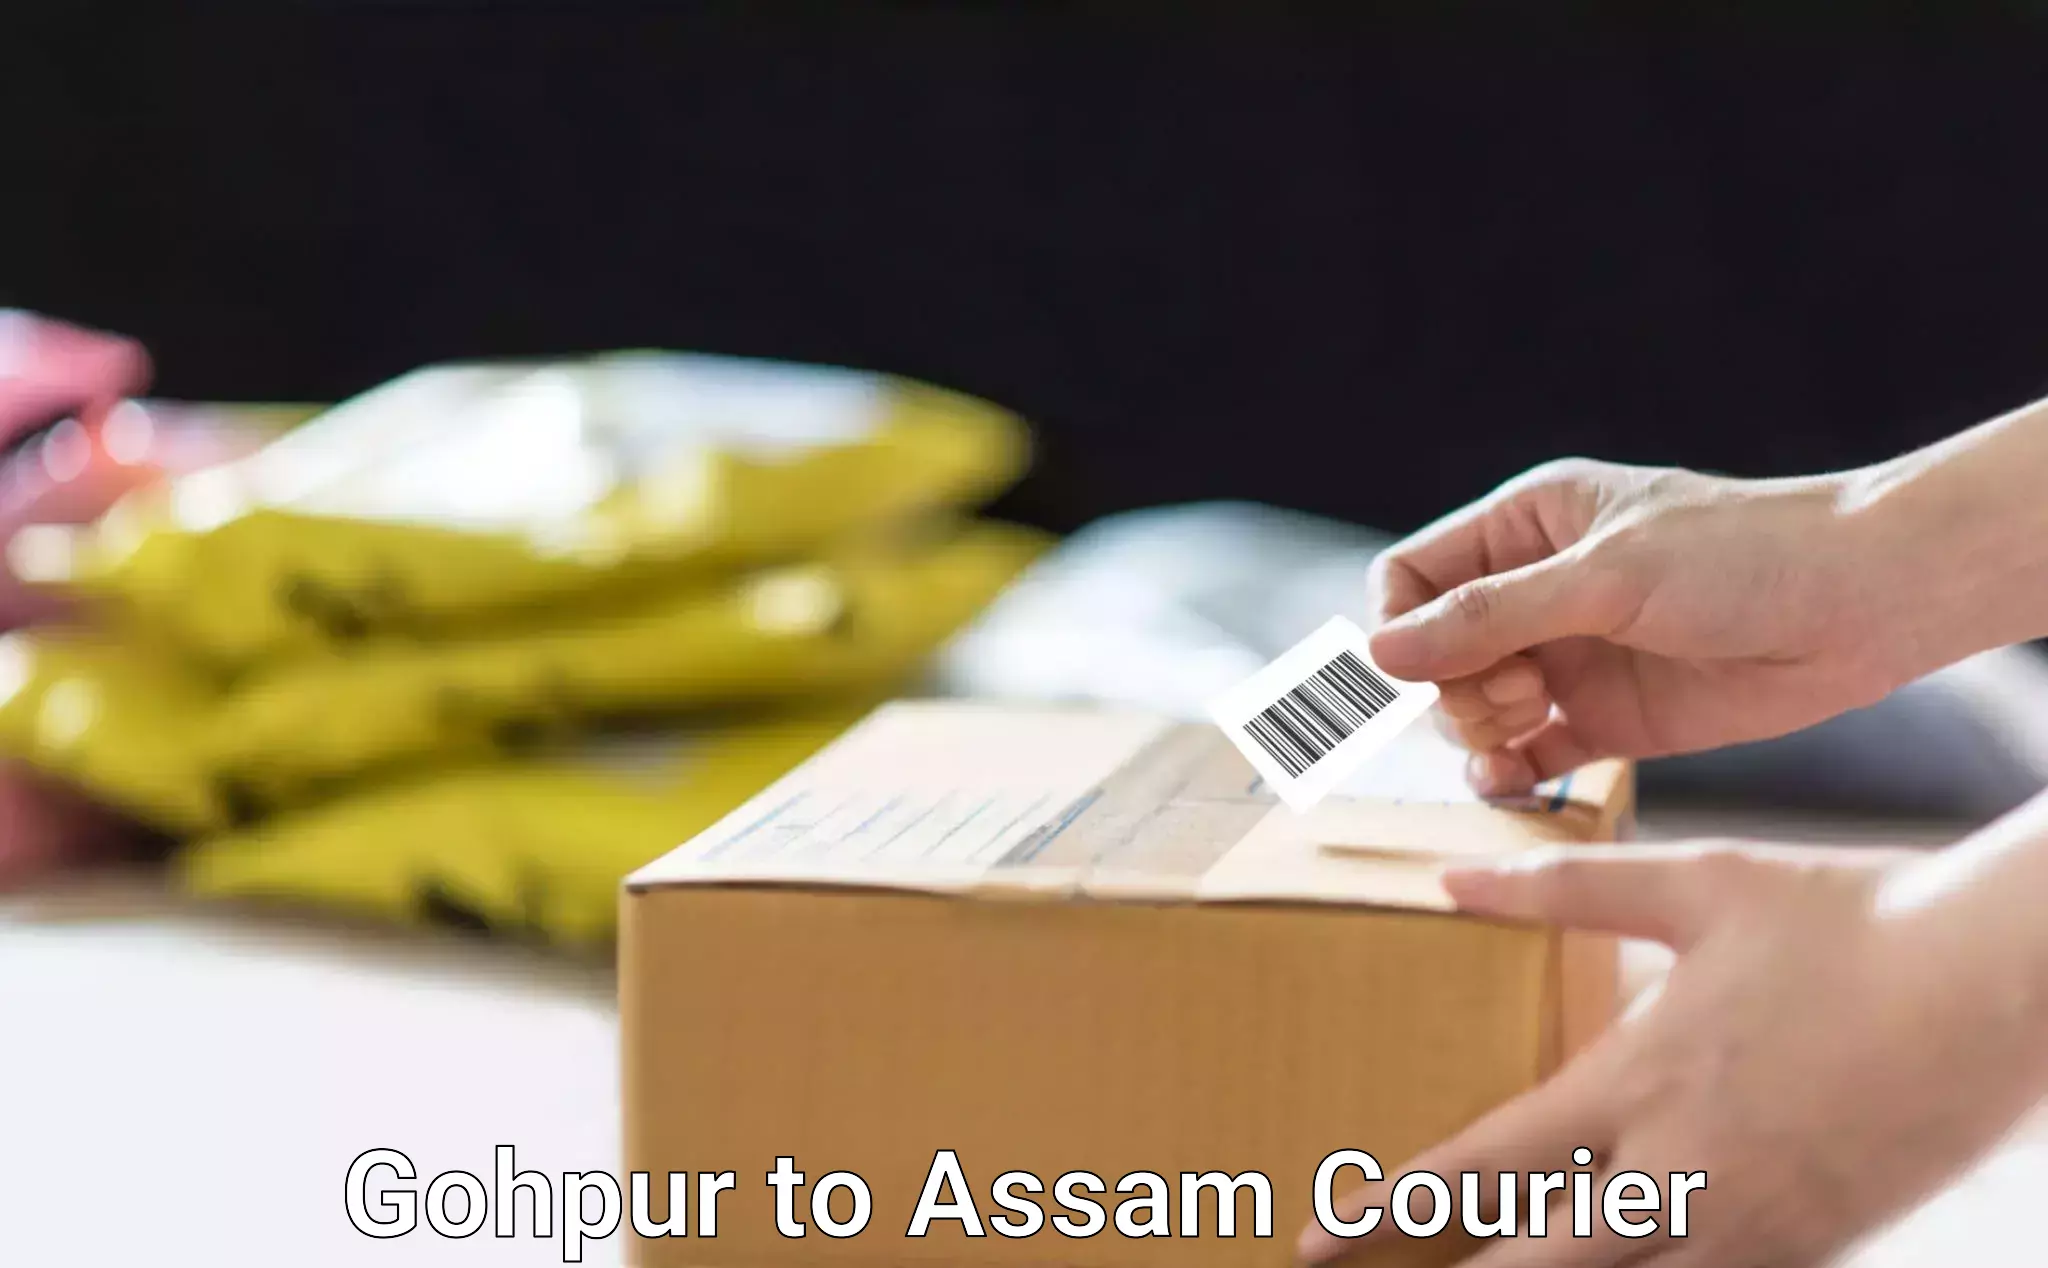 Large package courier Gohpur to Mariani